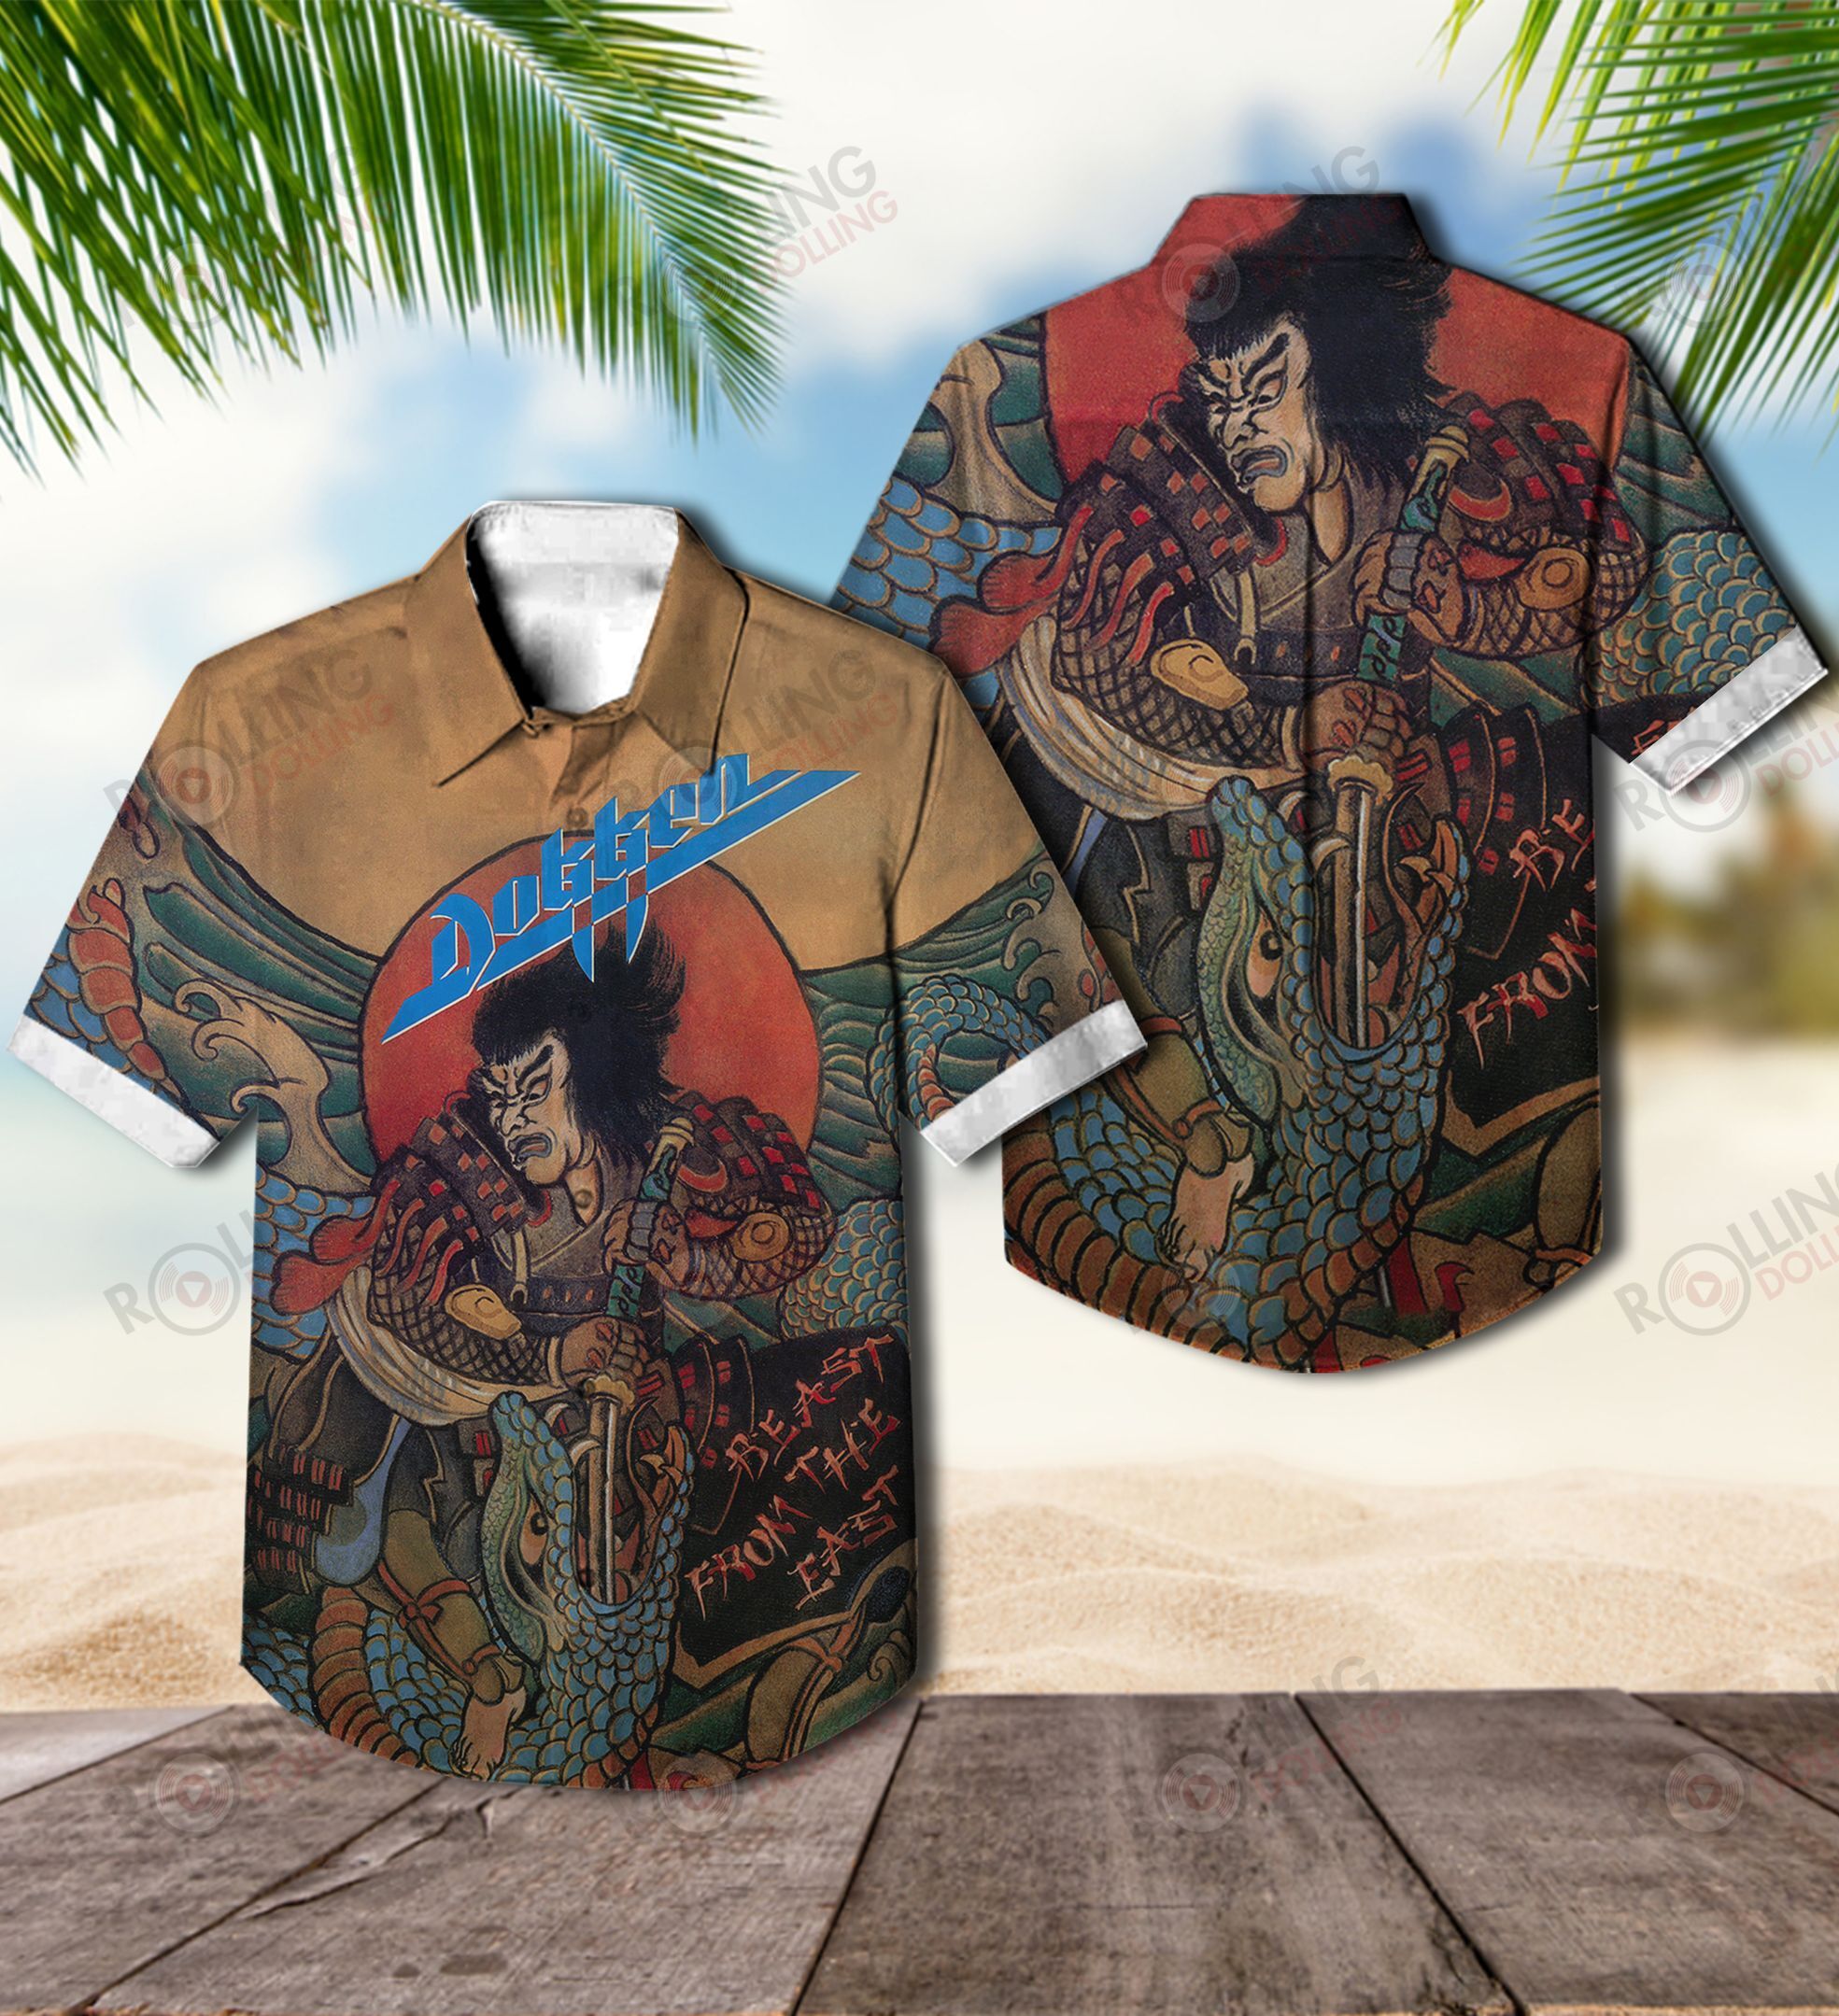 The Hawaiian Shirt is a popular shirt that is worn by Rock band fans 13